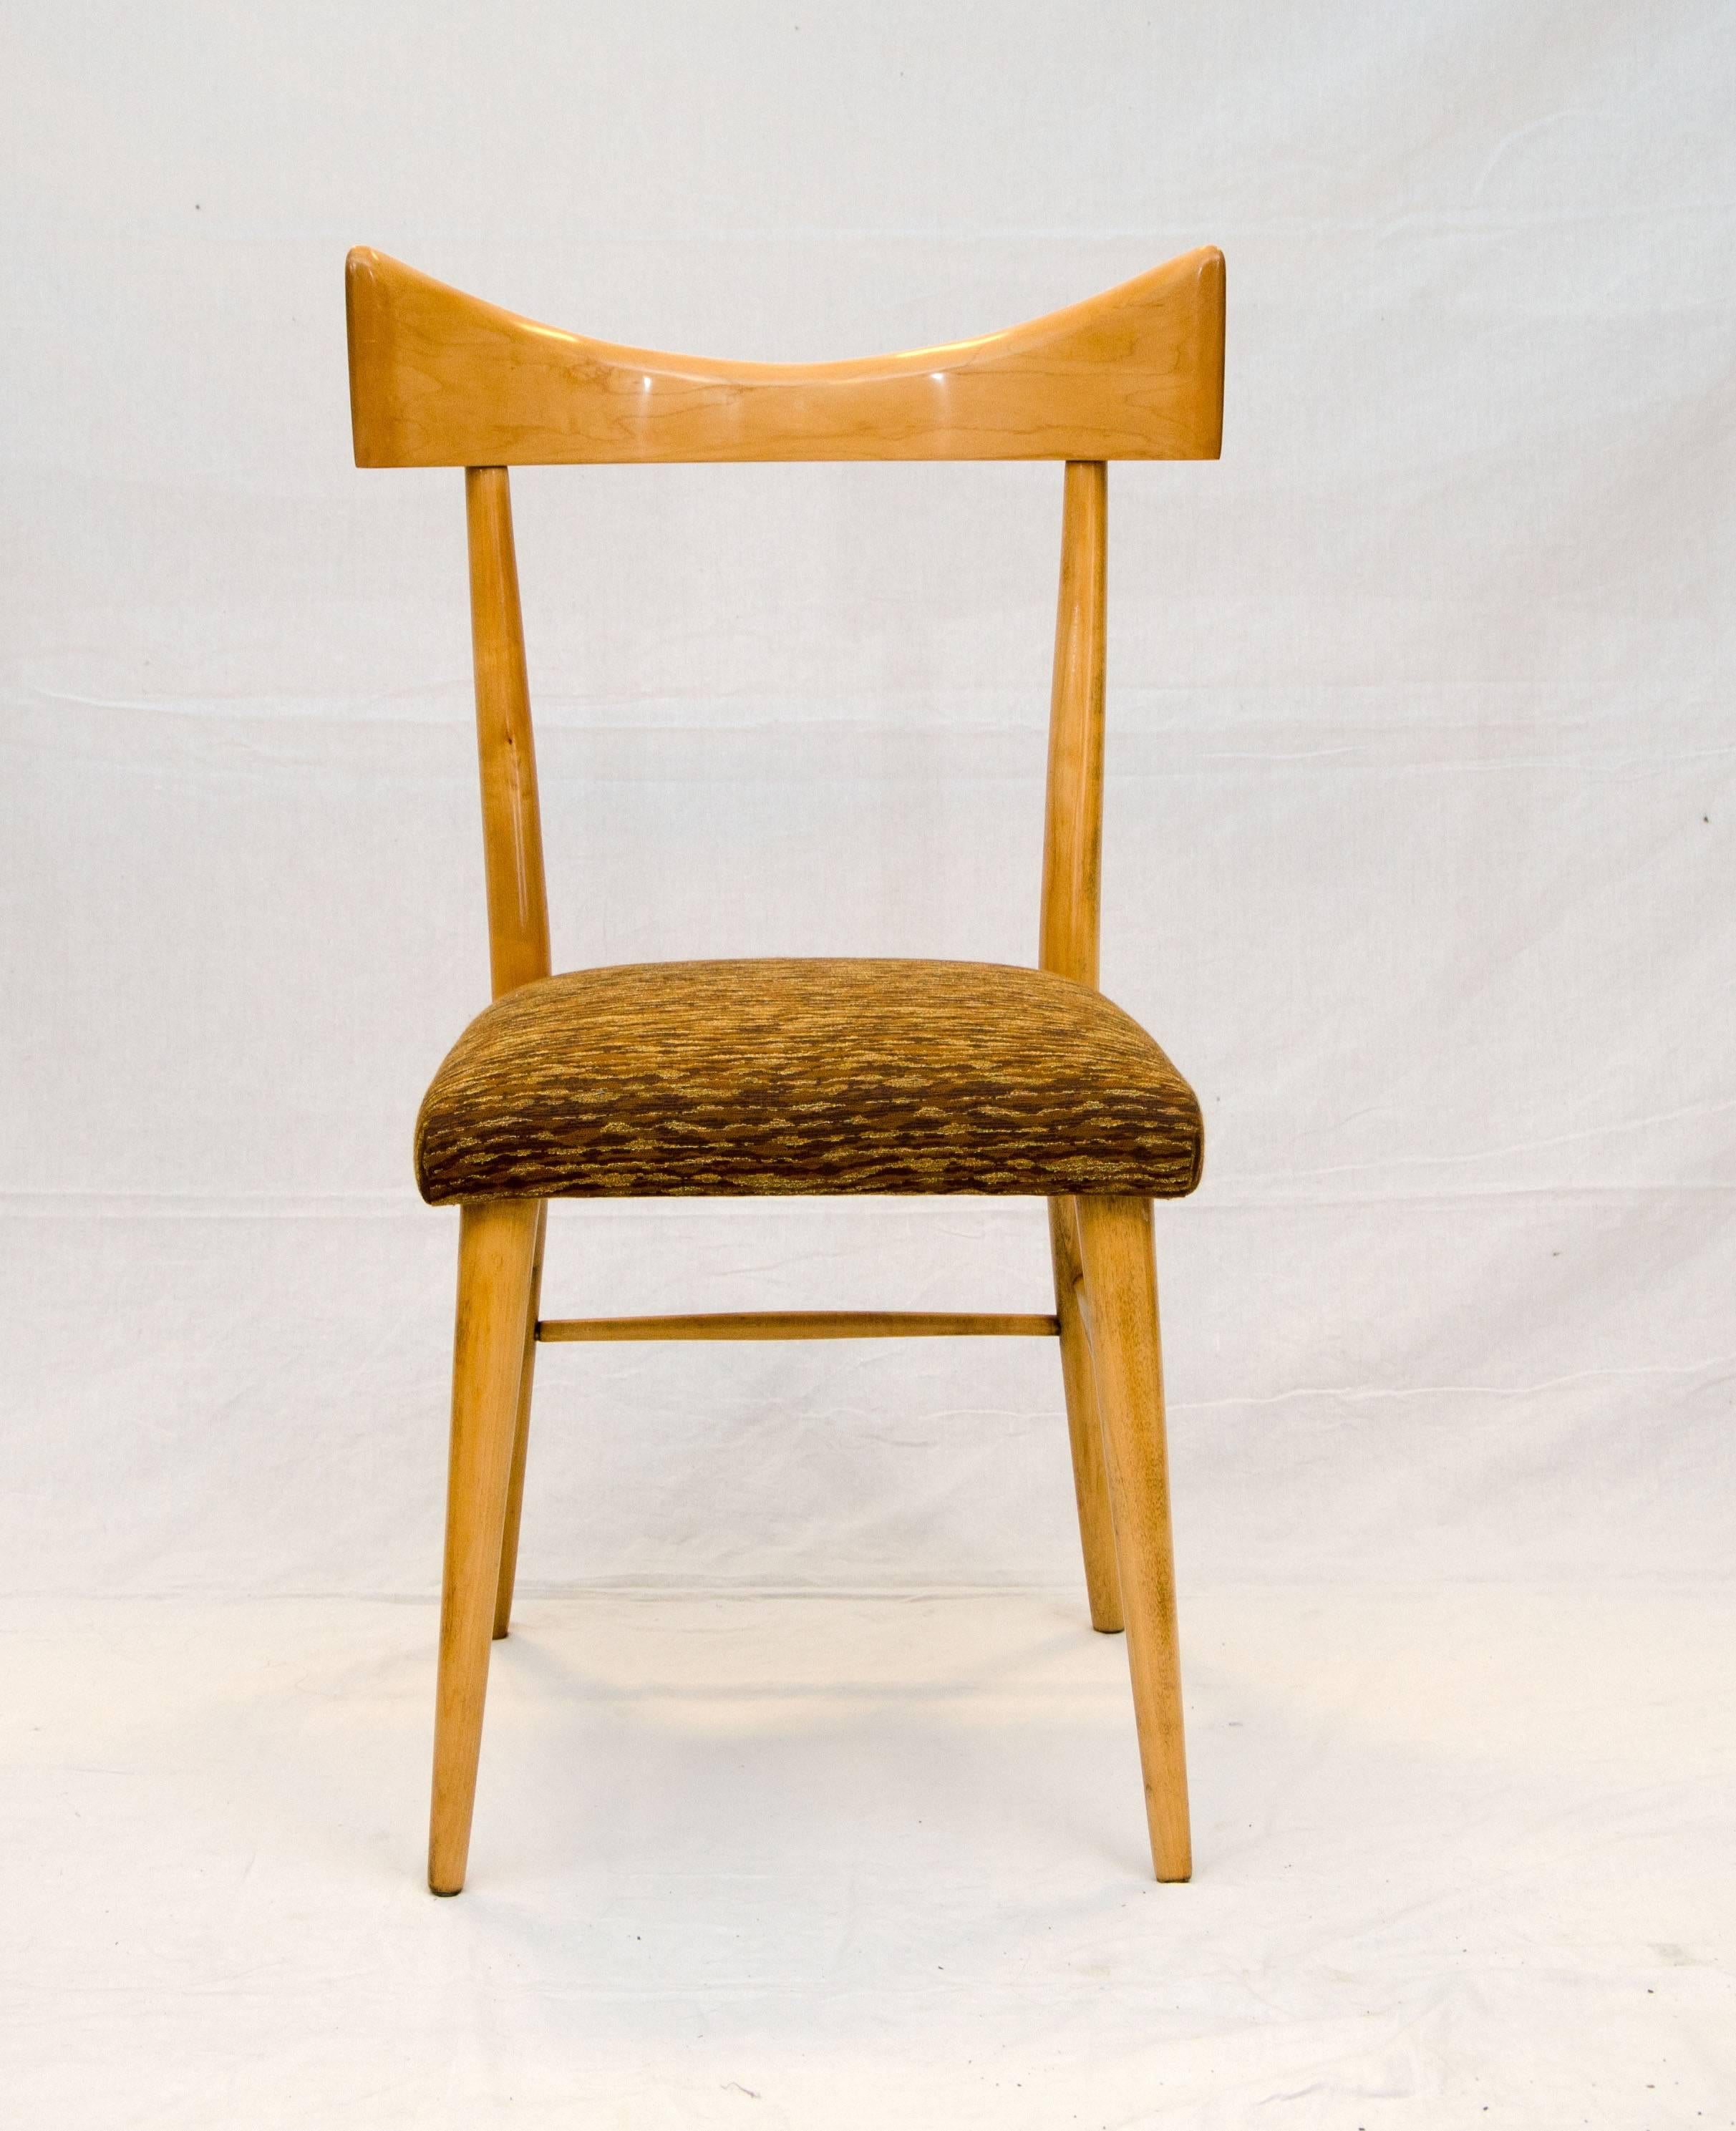  Nice single Paul McCobb chair for accent or desk. Has a bow back design and upholstered seat. The seat fabric is very vintage style with a gold thread running through it.